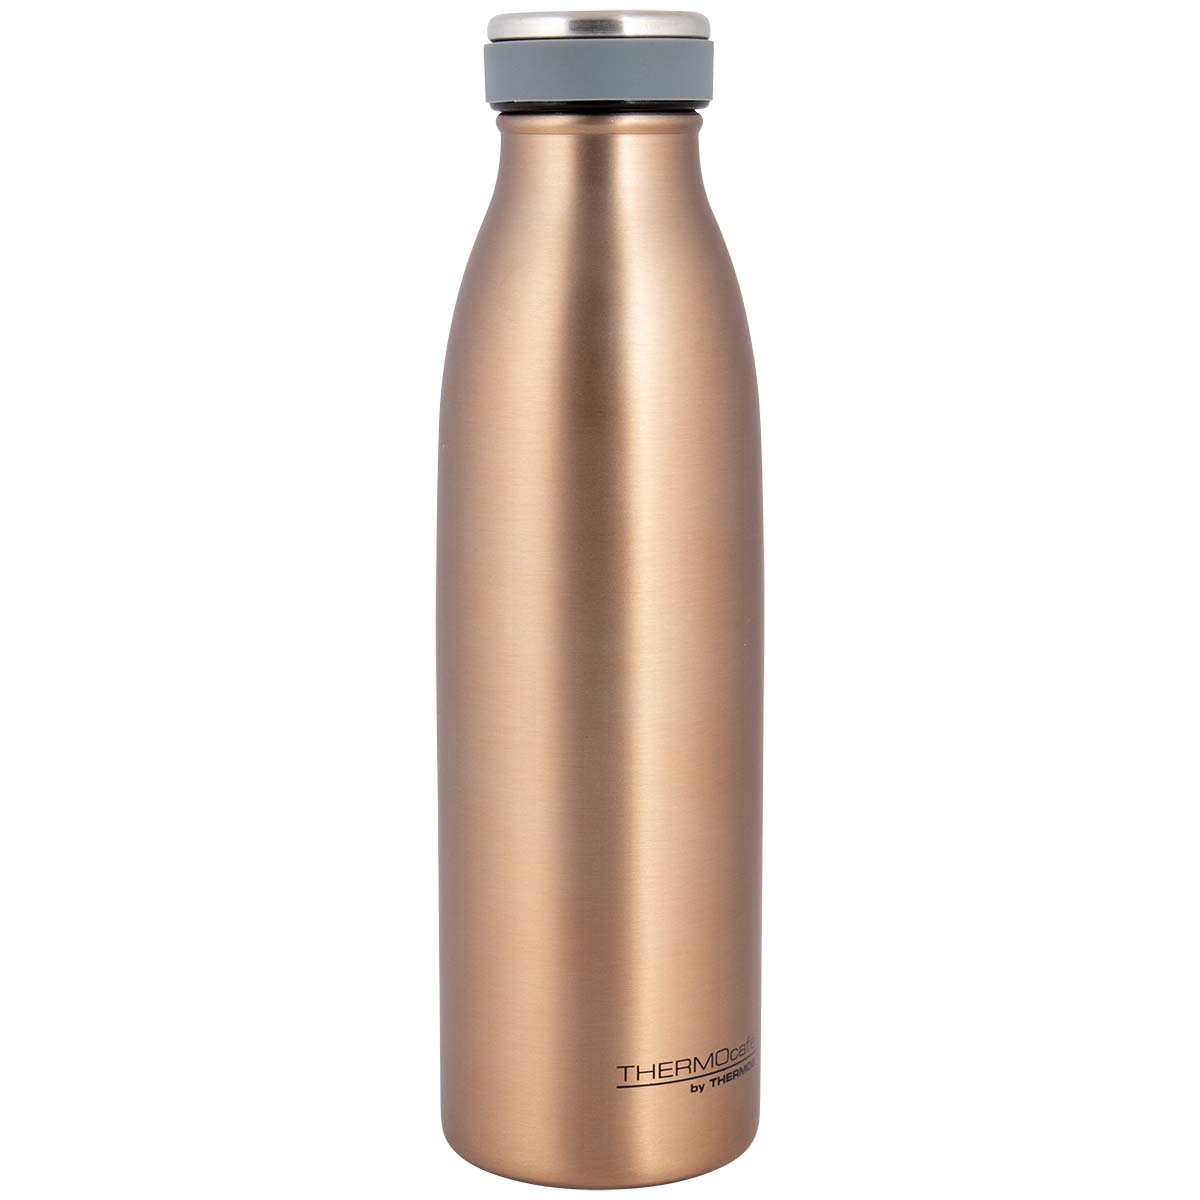 7398120 Absolutely leak-proof, even with carbonation. Rubber twist cap for easy, slip-free opening. The slim bottle design fits in any bag. High-quality stainless steel housing: unbreakable and flavor-neutral.